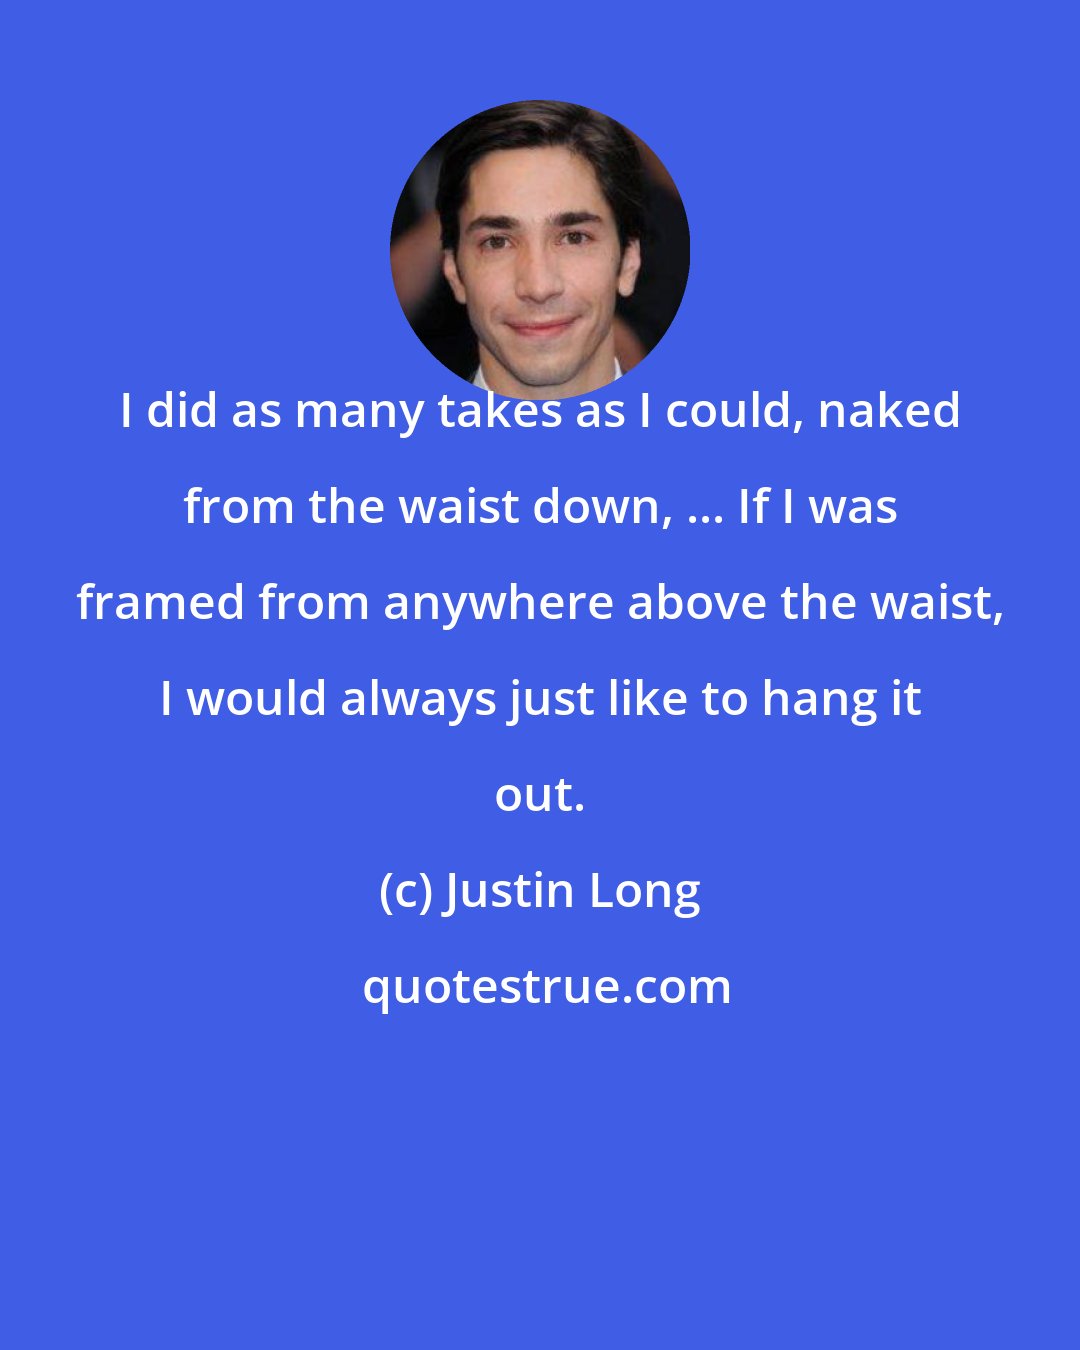 Justin Long: I did as many takes as I could, naked from the waist down, ... If I was framed from anywhere above the waist, I would always just like to hang it out.